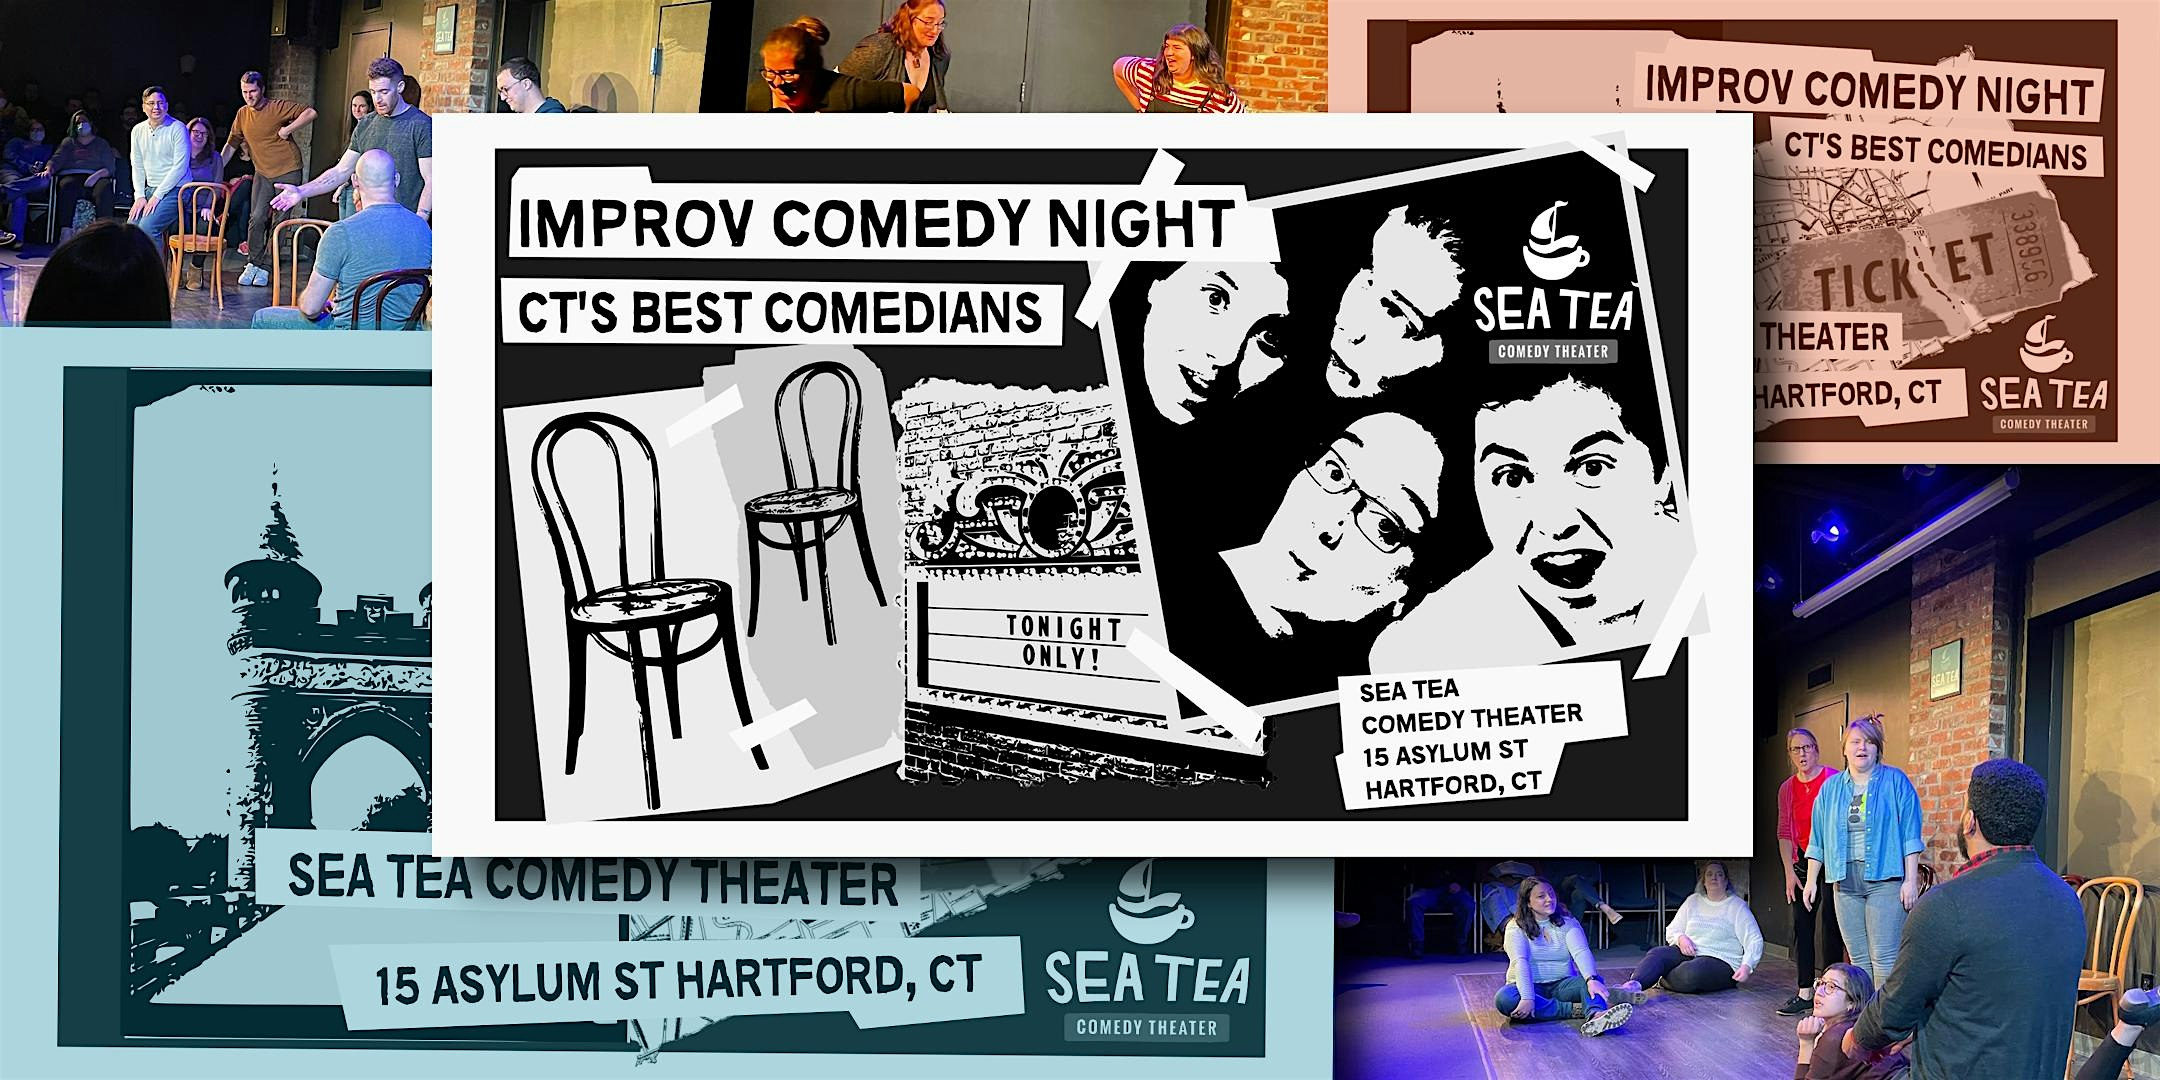 Improv Comedy Night feat. Less Lonely Boys, Mmmm!, Romantic Baby